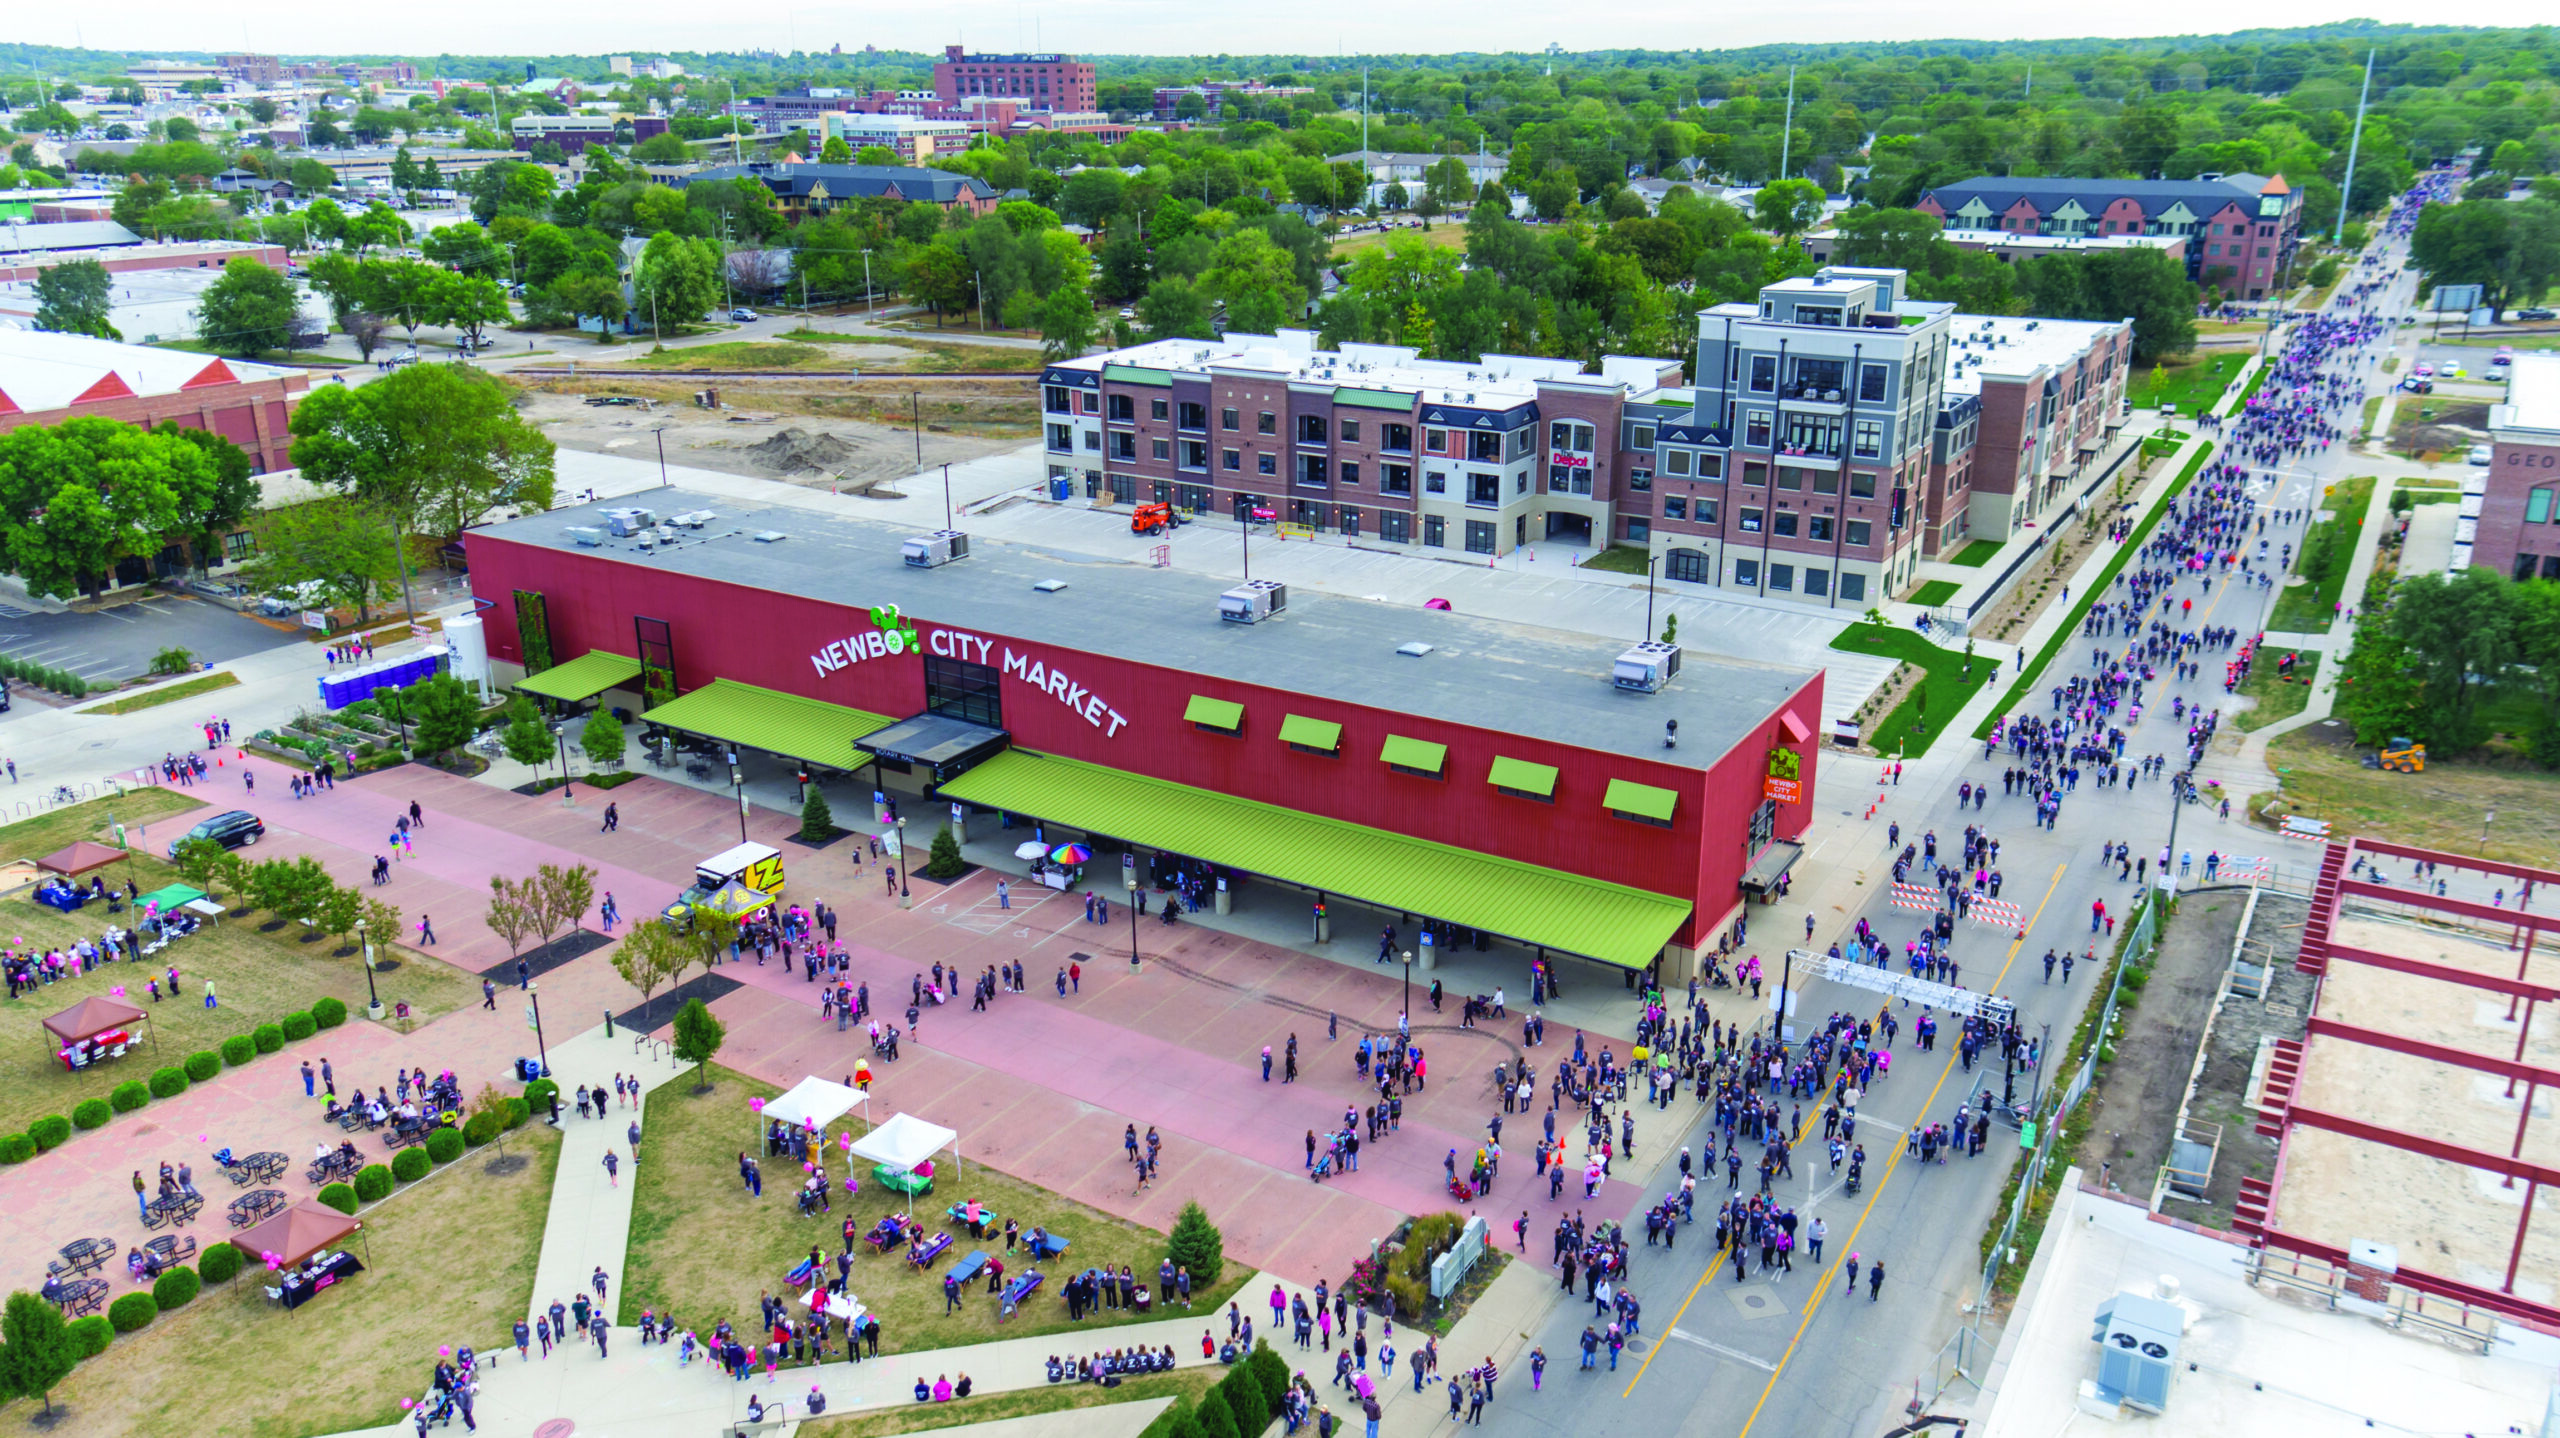 An aerial view of NewBo City Market in 2018.